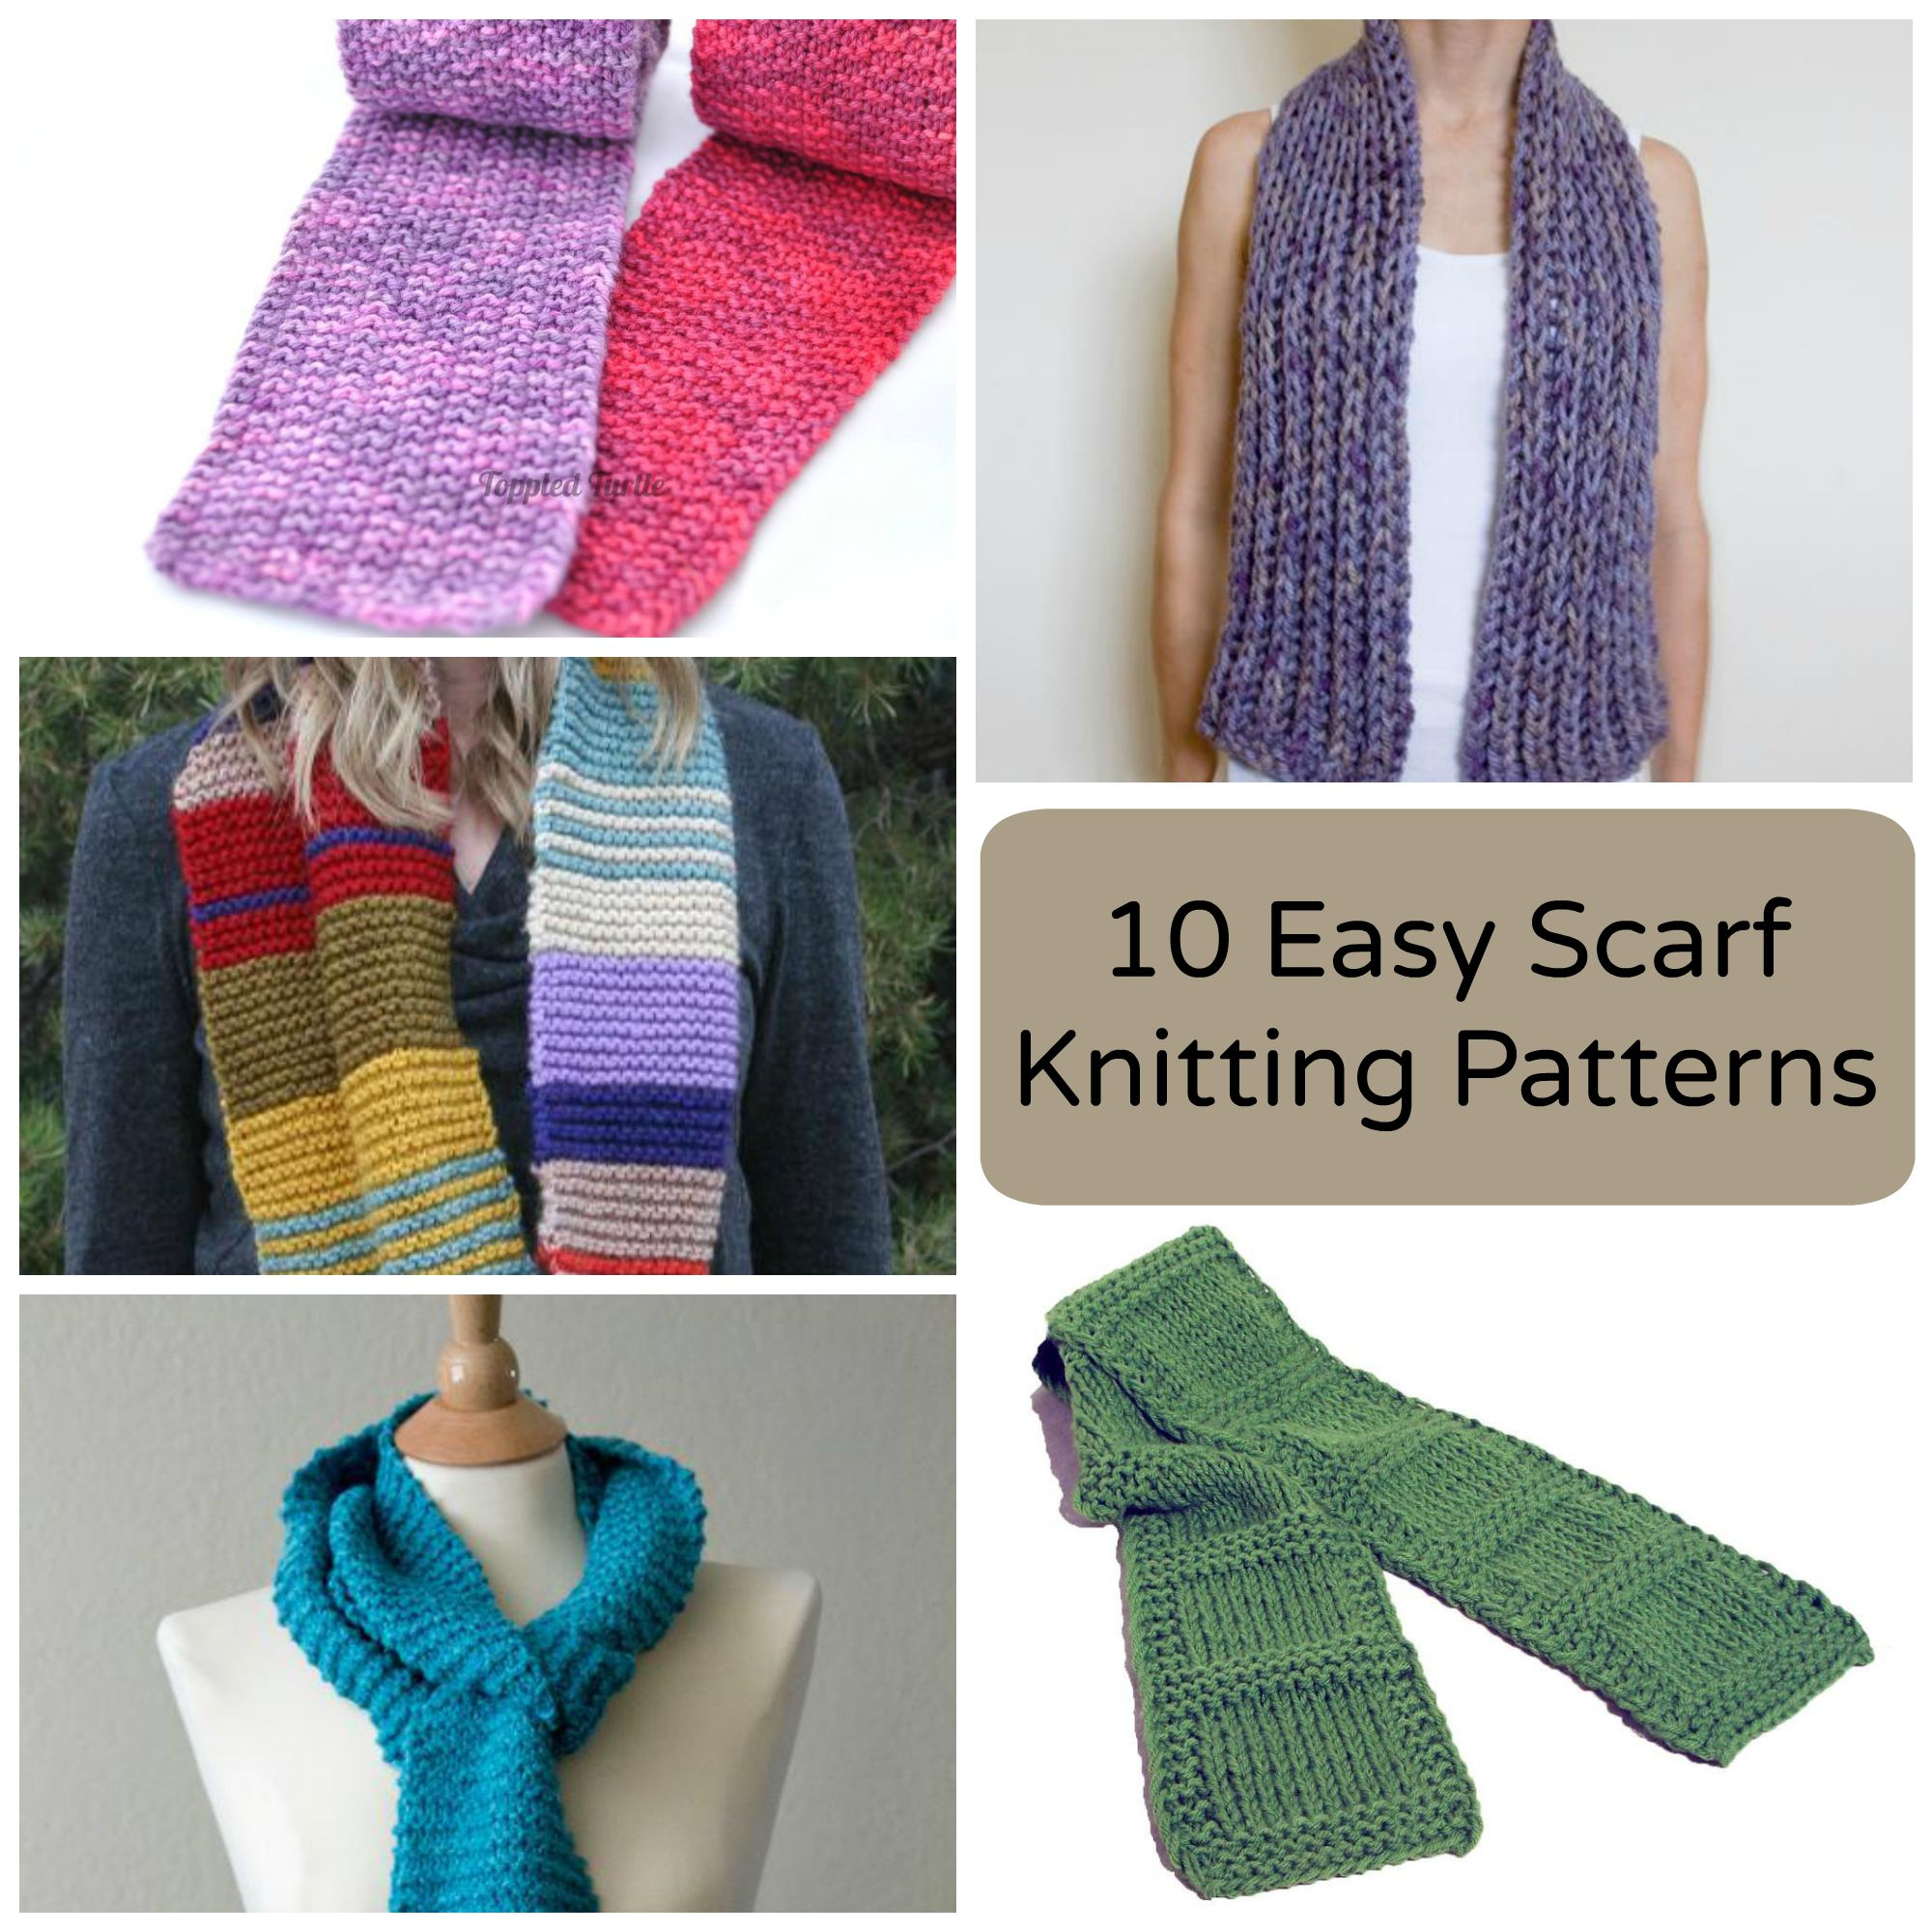 Simple Scarf Knitting Patterns For Beginners Beautiful Scarf Knitting Patterns Crochet And Knitting Patterns 2019